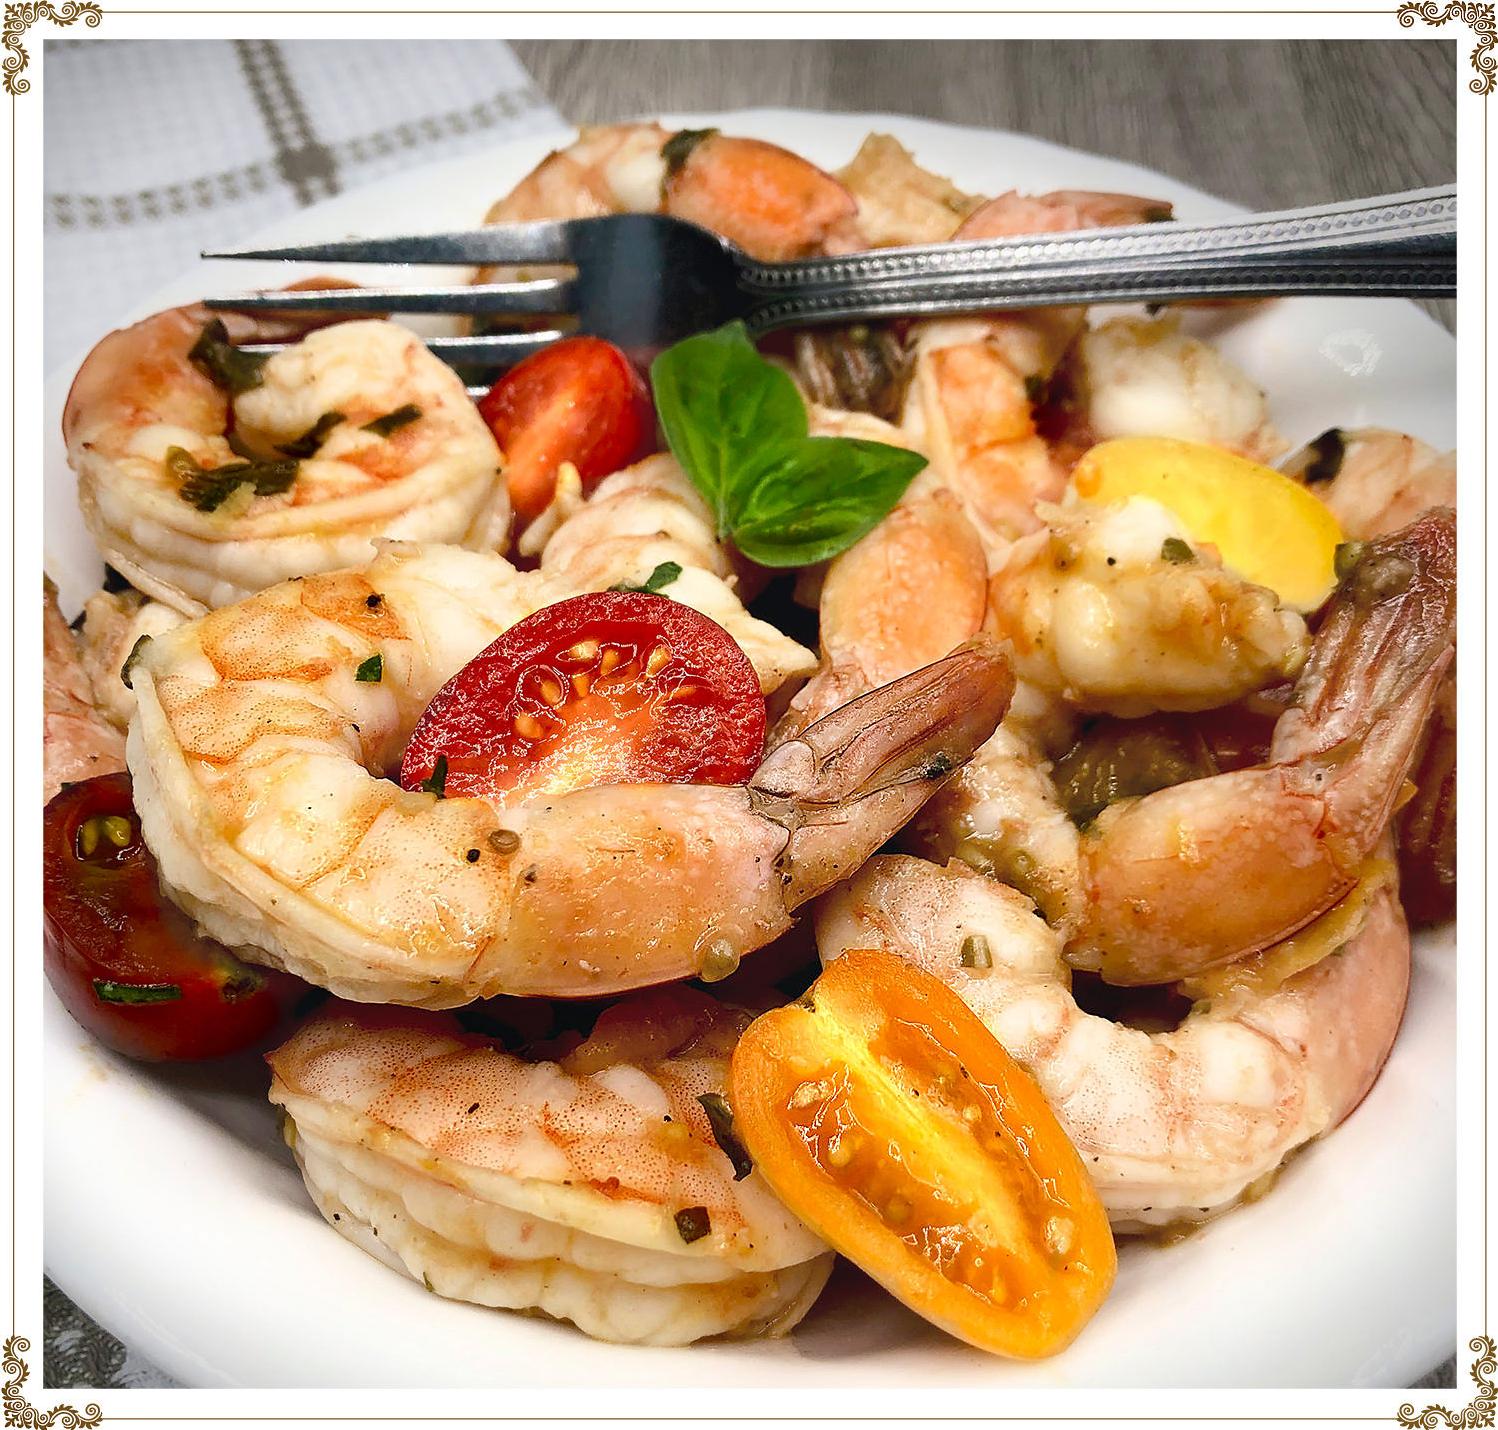  Chopped basil and oozing tomato sauce add color to the succulent shrimp.